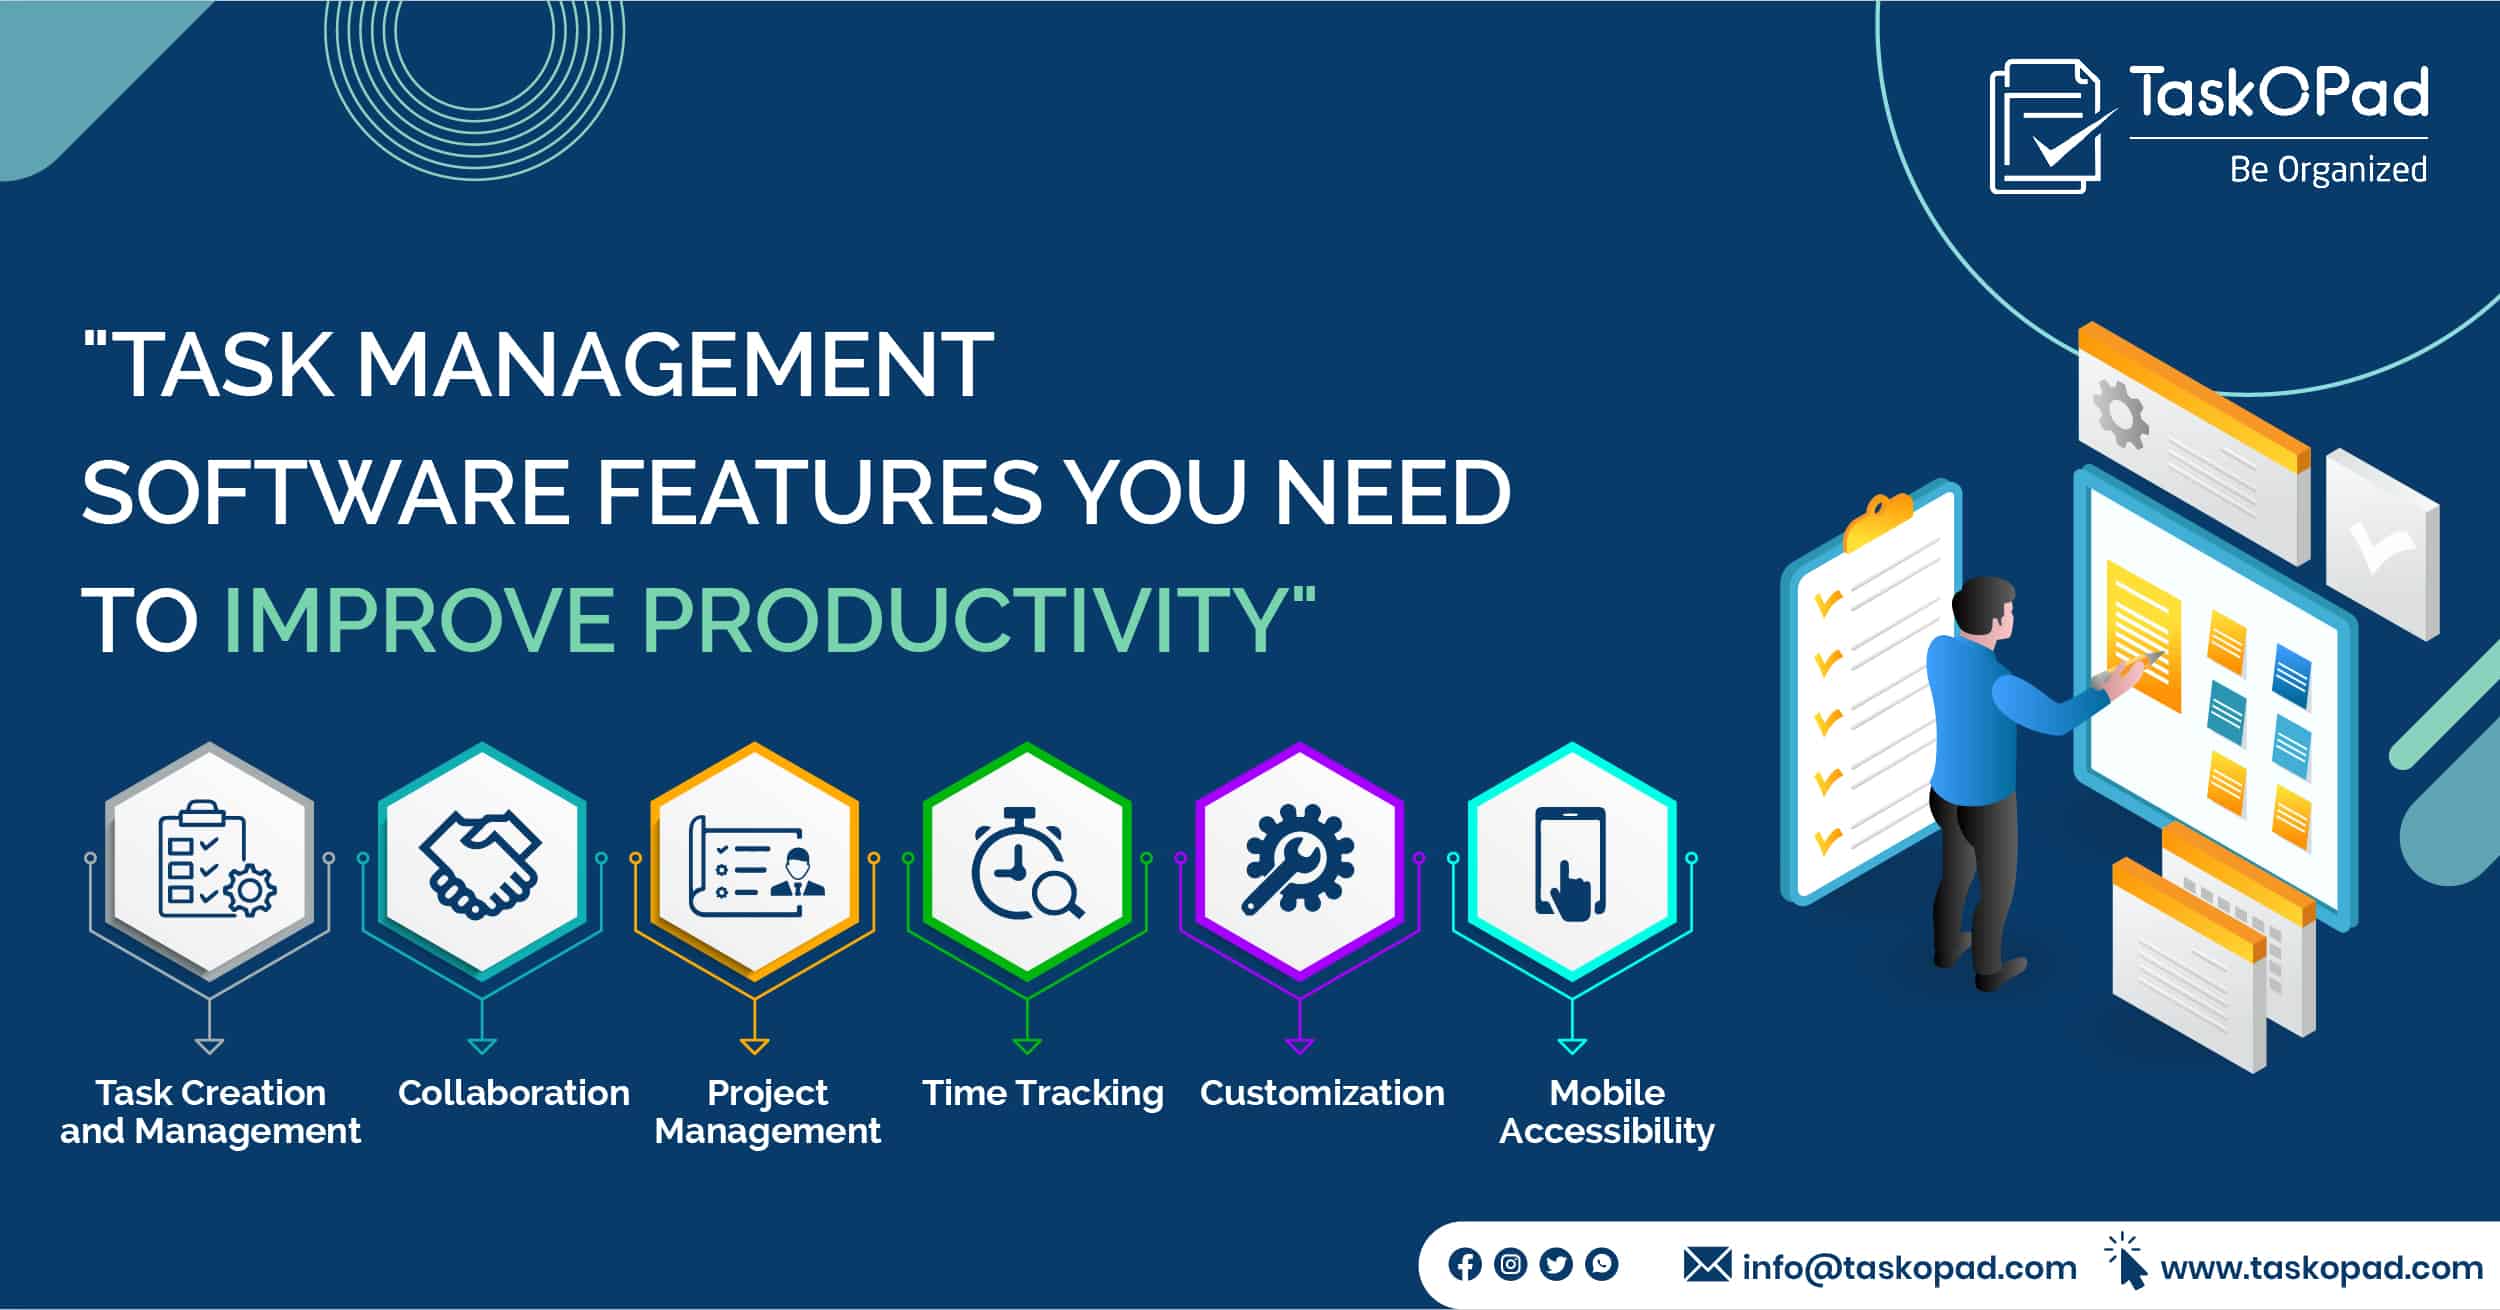 Task Management Software Features You Need to Improve Productivity